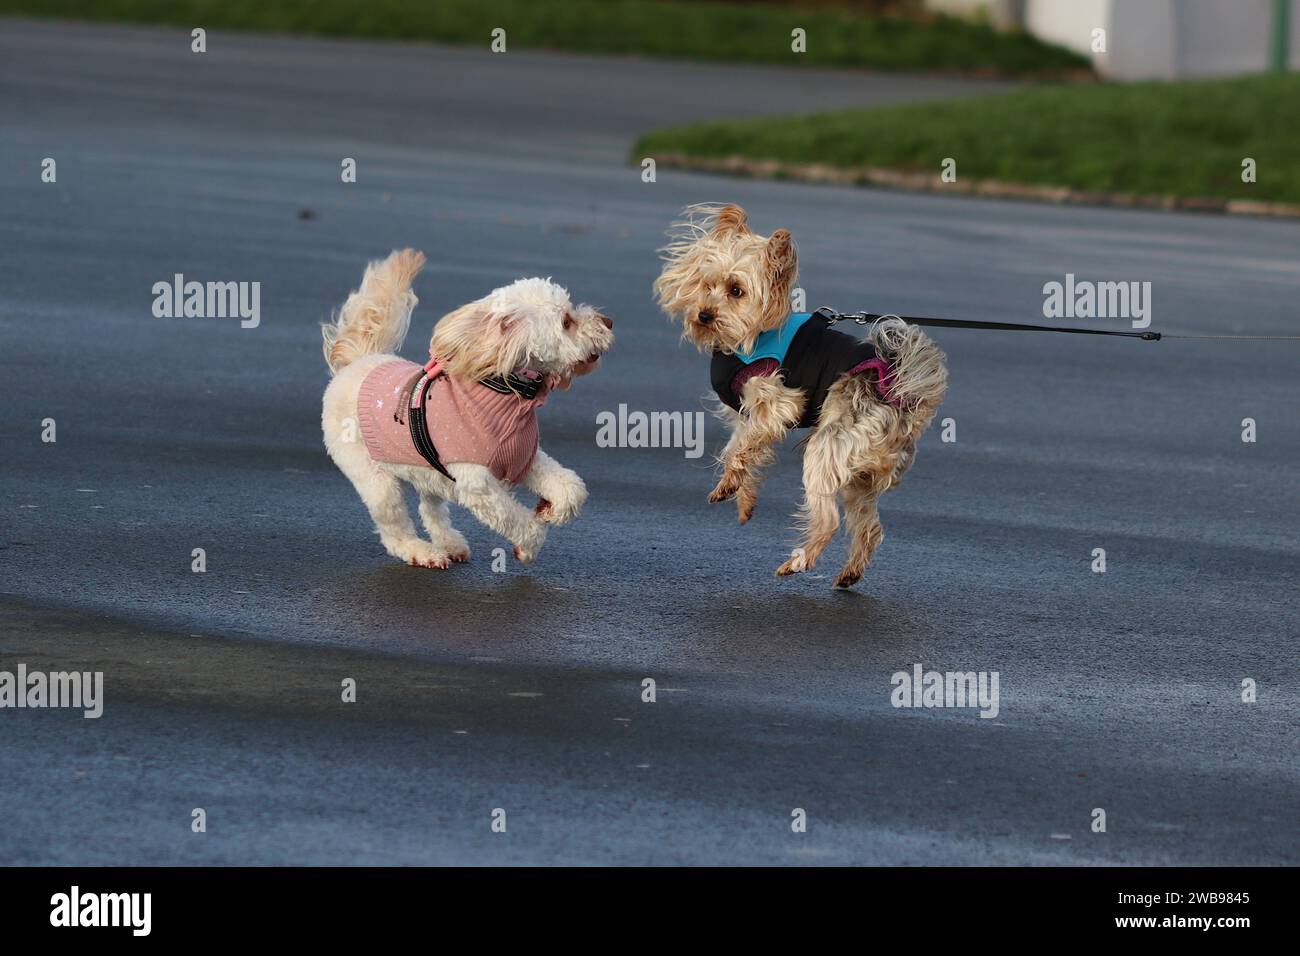 Two dogs excitedly play rough and tumble while being exercised on a December morning as their owners were engaged in conversation. Stock Photo